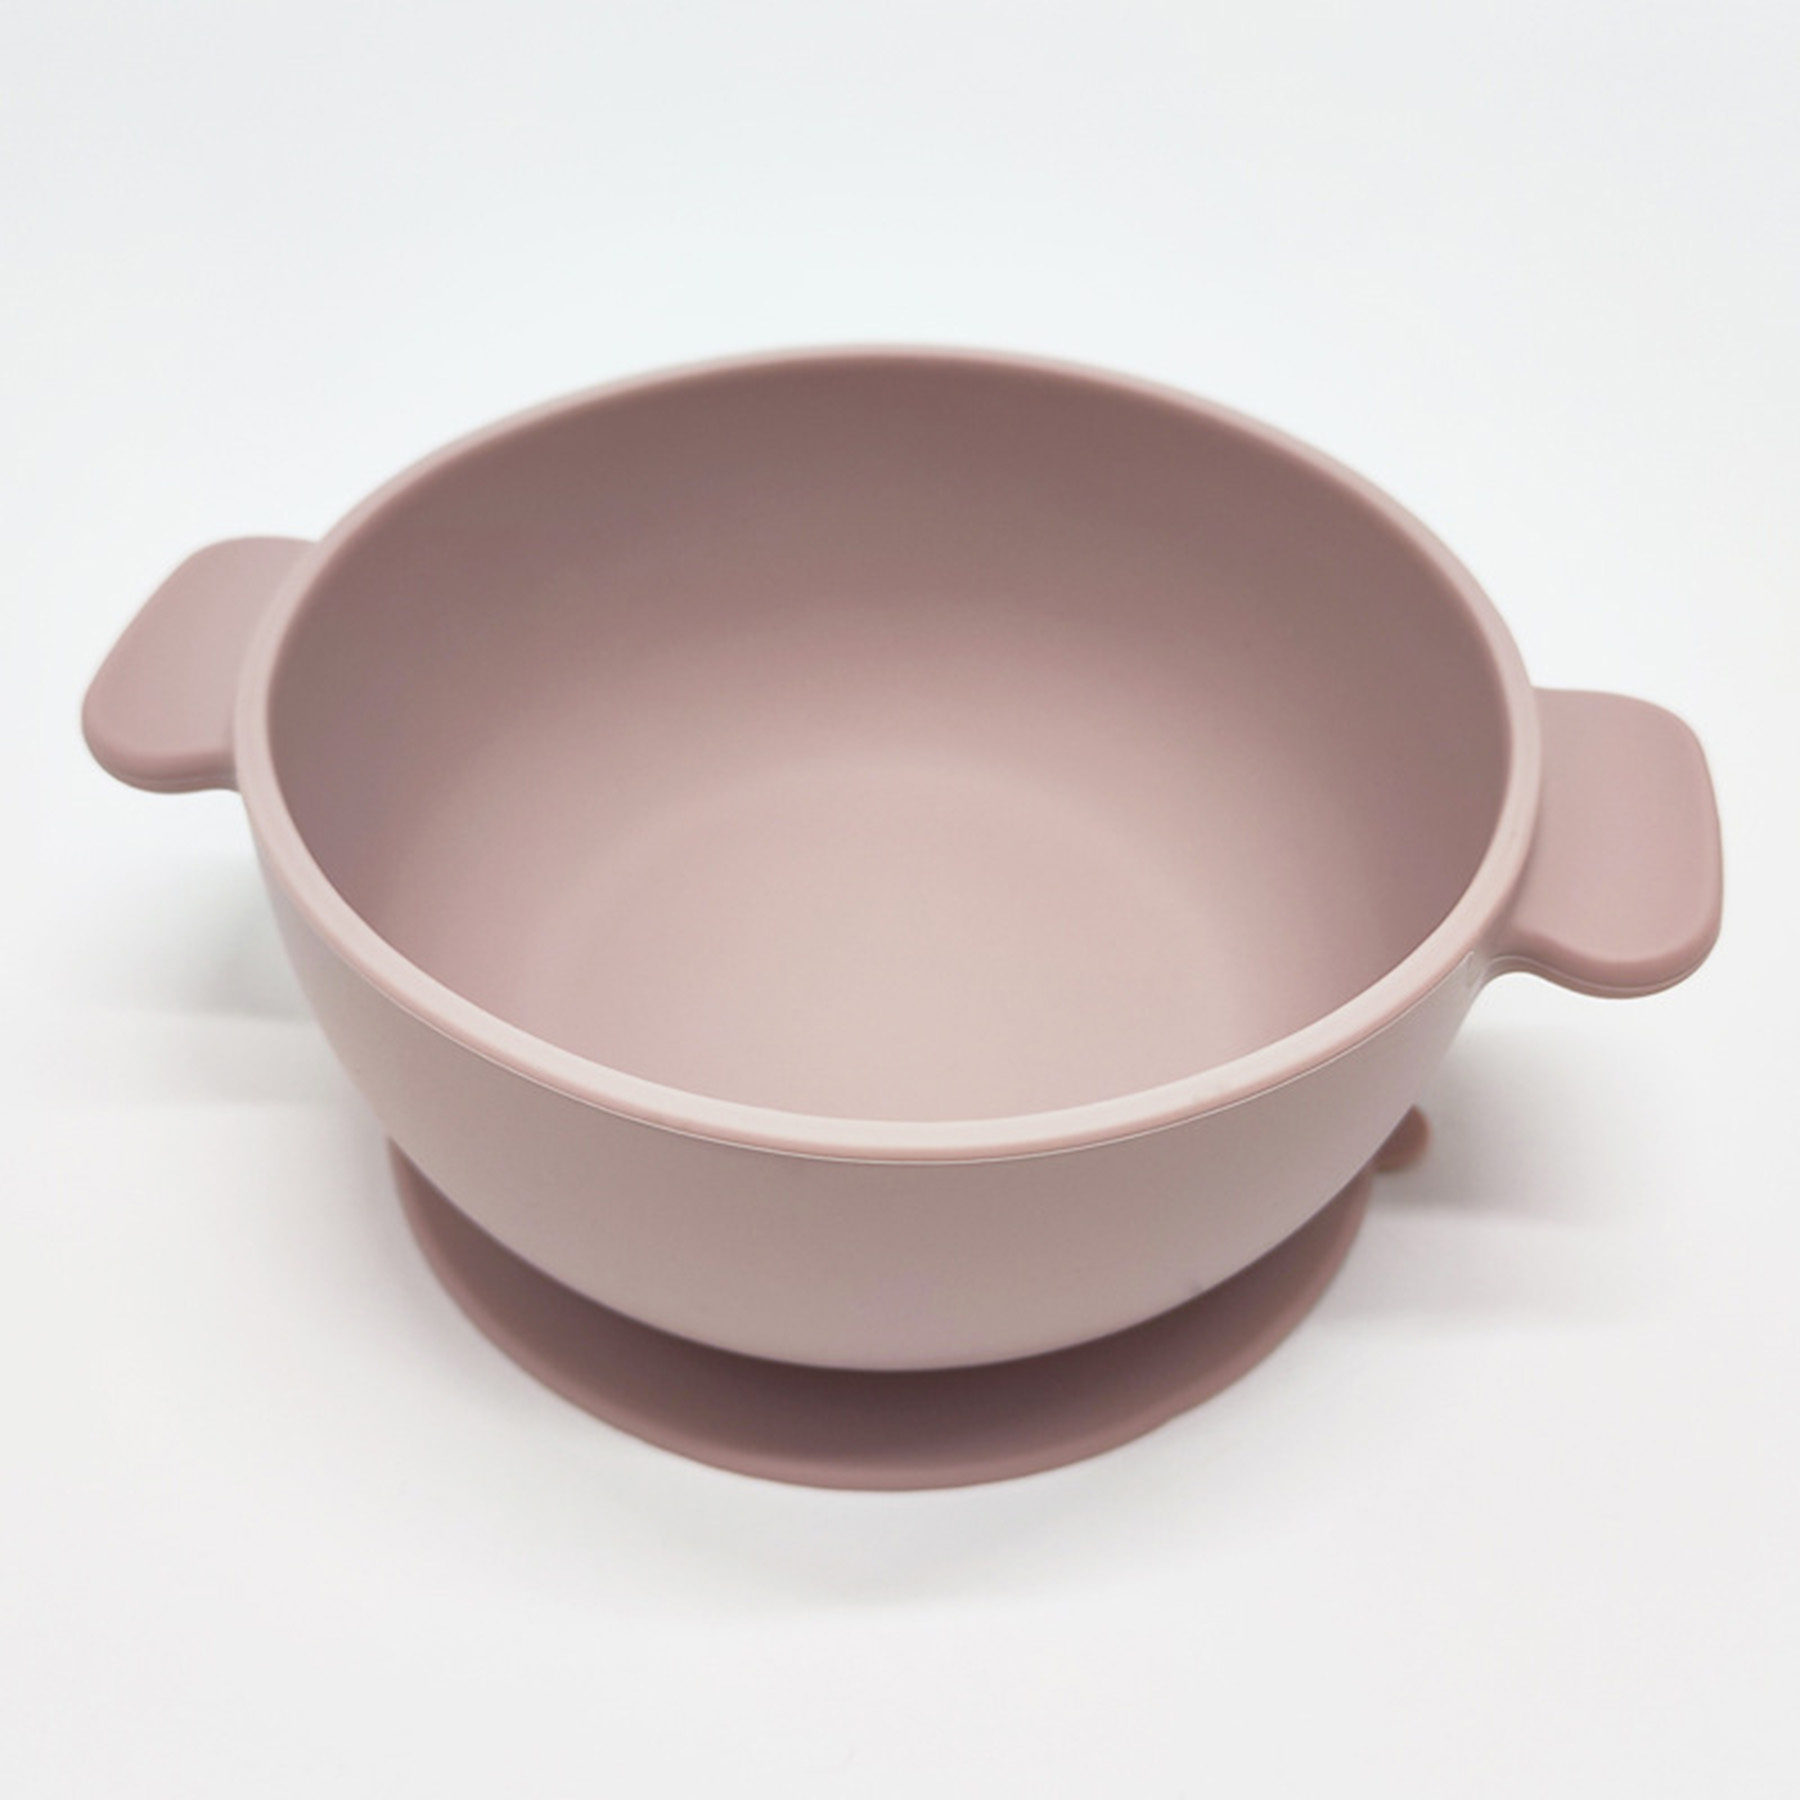 Anti-slip handles Baby Bowls with Suction